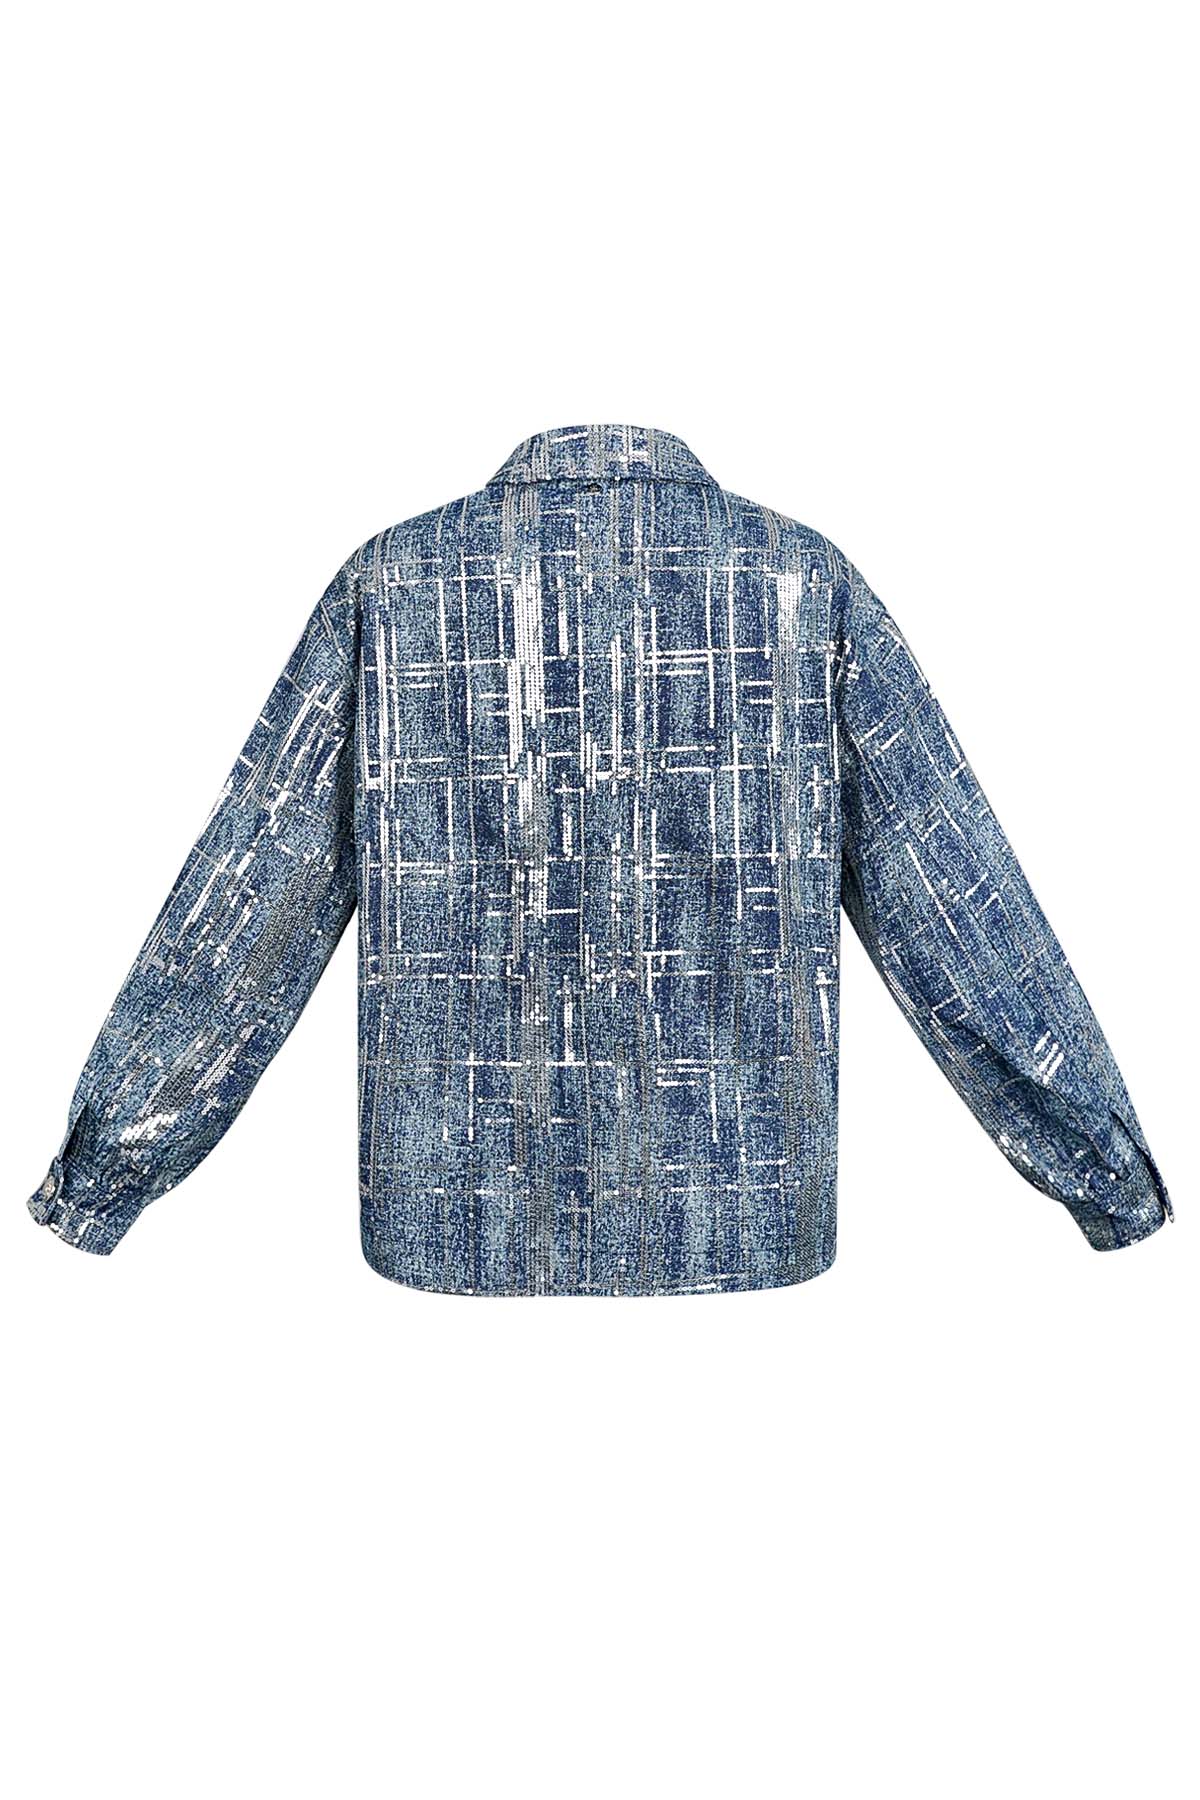 Jacket denim look with sequins - blue - S h5 Picture7